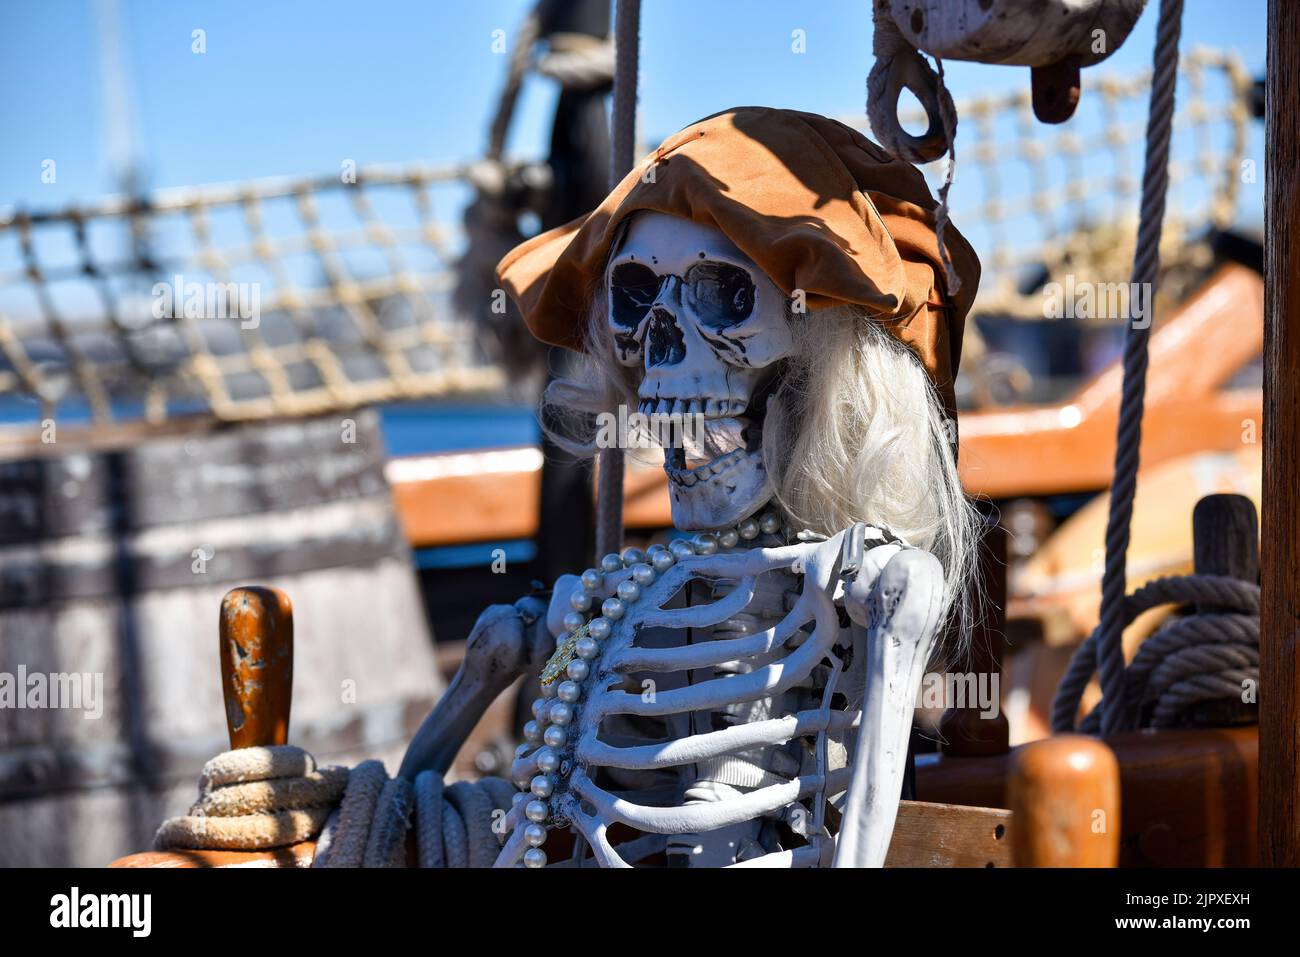 Spooky mock up pirate skeleton wearing a hat and a pearl necklace on a traditional sailing ship. Stock Photo